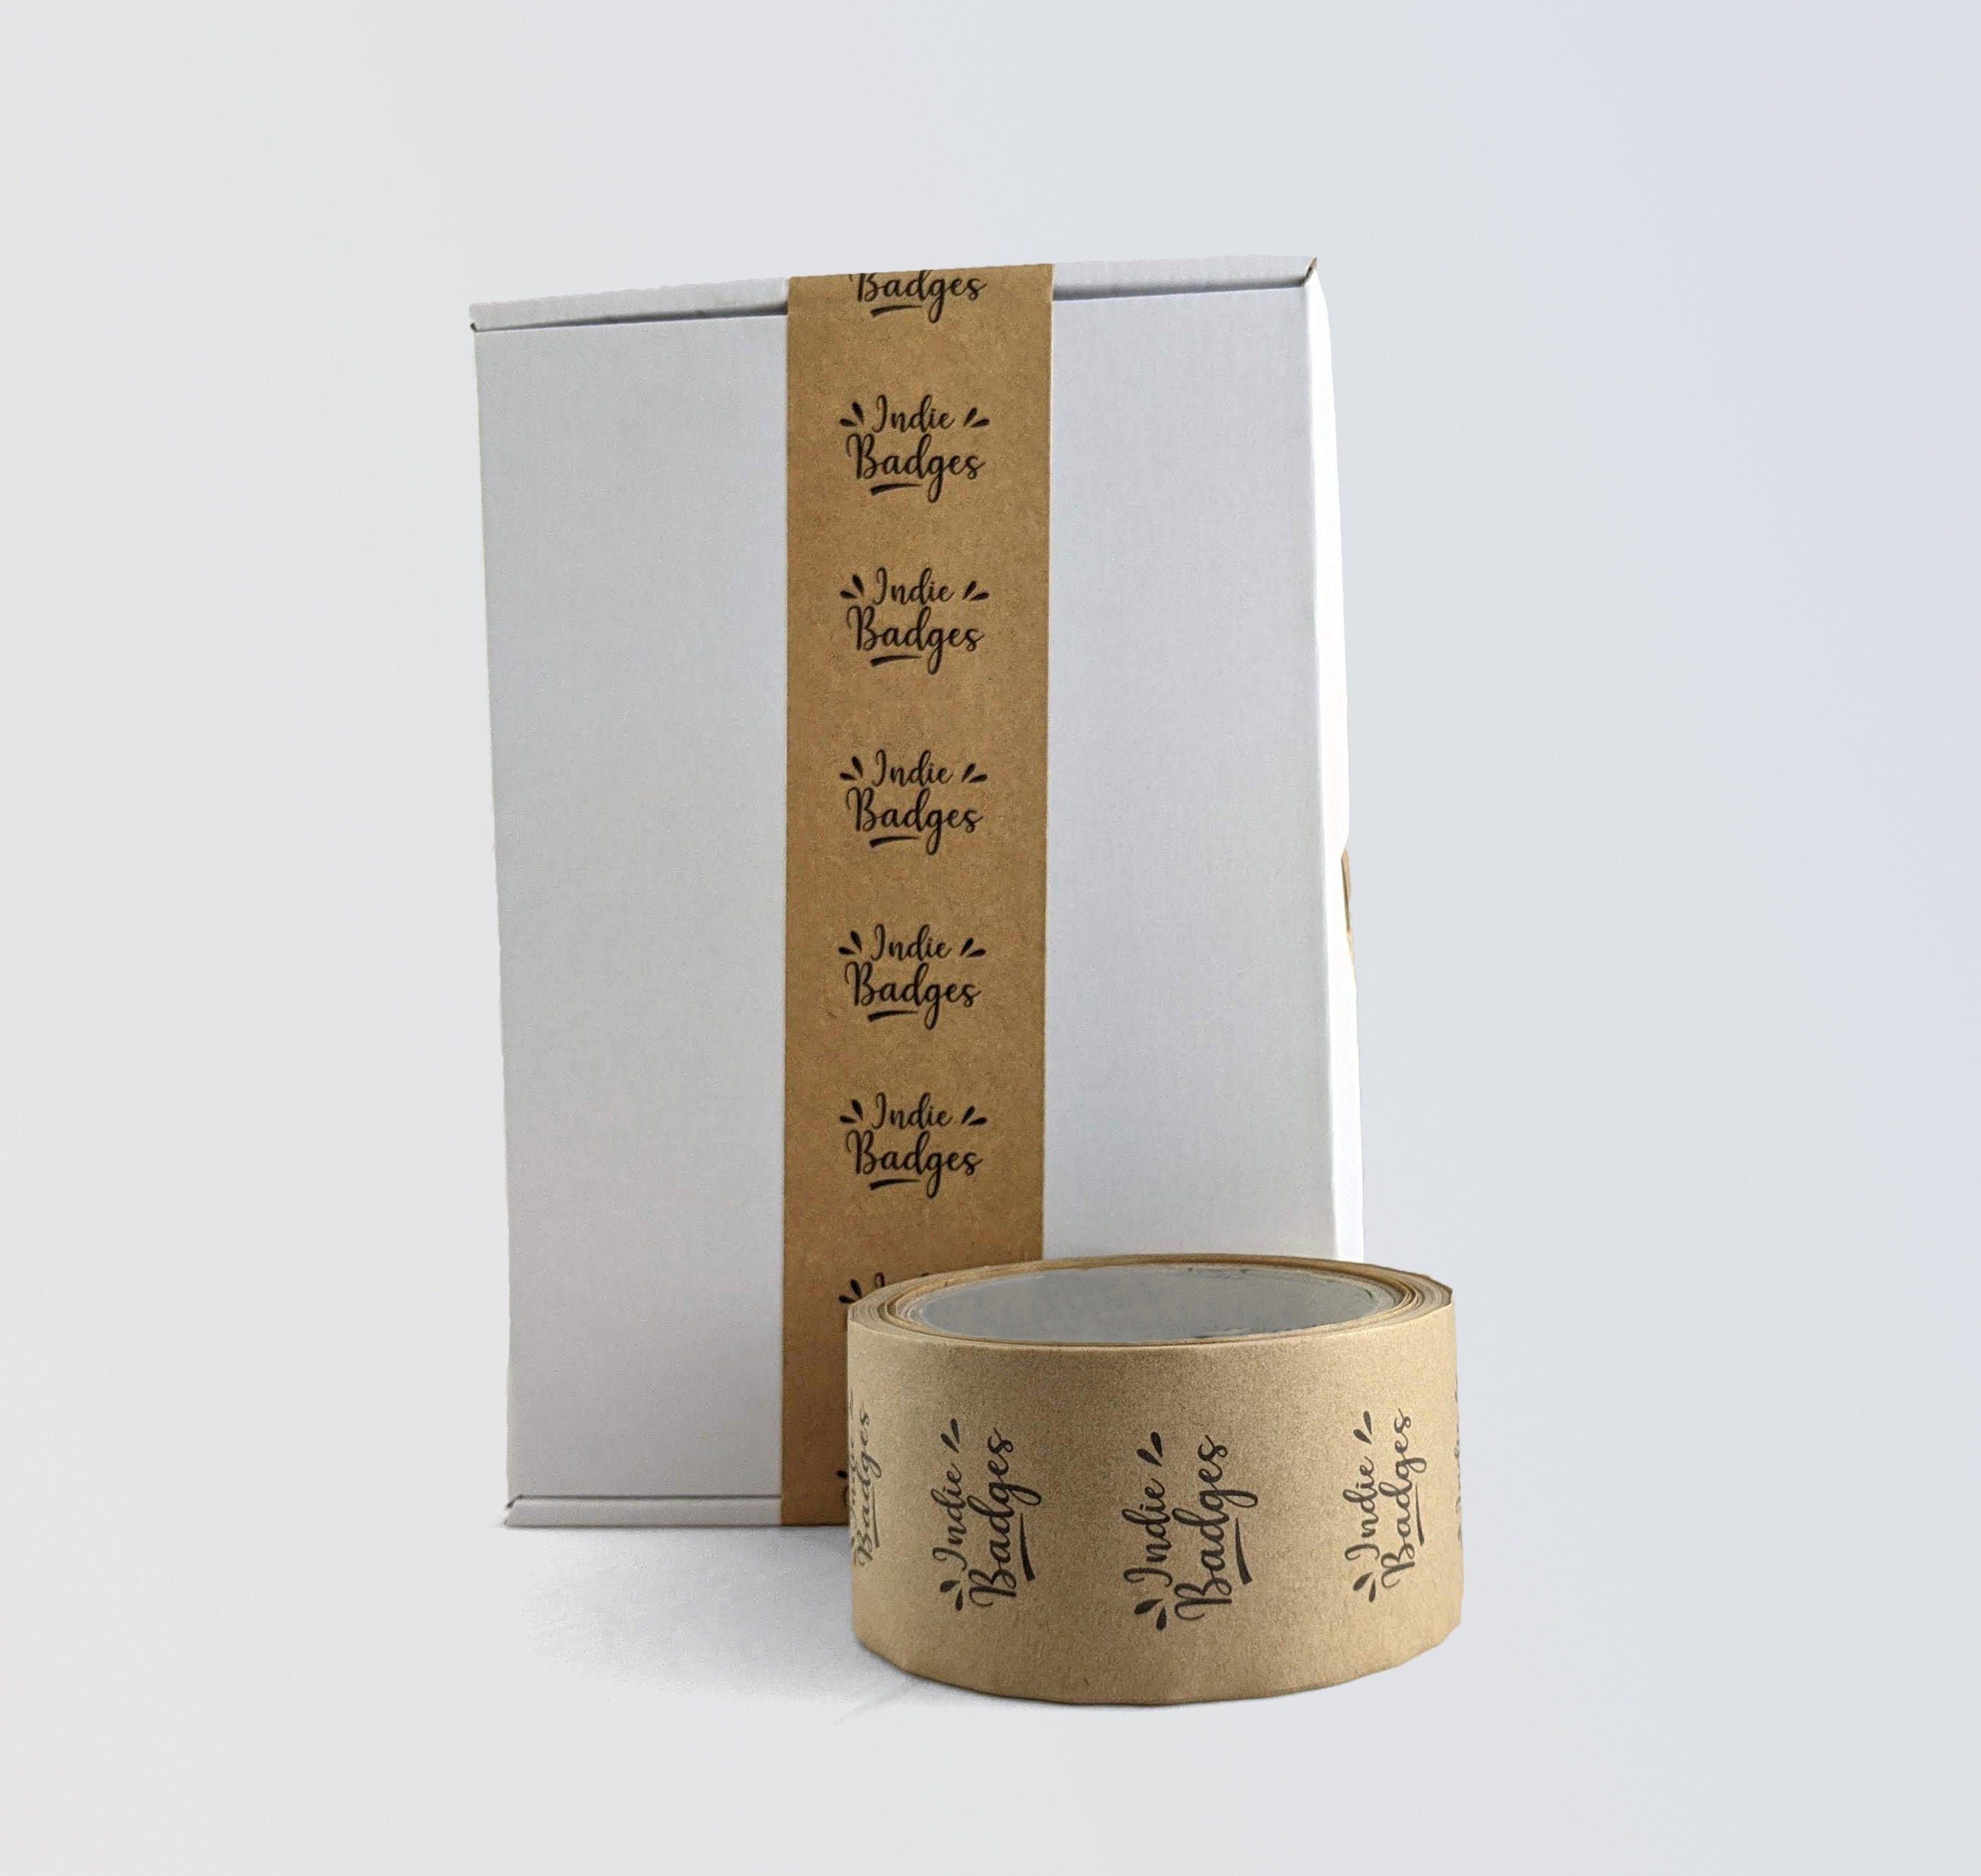 Custom Packing Tape, Gummed Tape, Packaging Tape, Personalised Tape, Paper  Tape, Custom Tape, Custom Printed, Parcel Tape, With Your Logo 